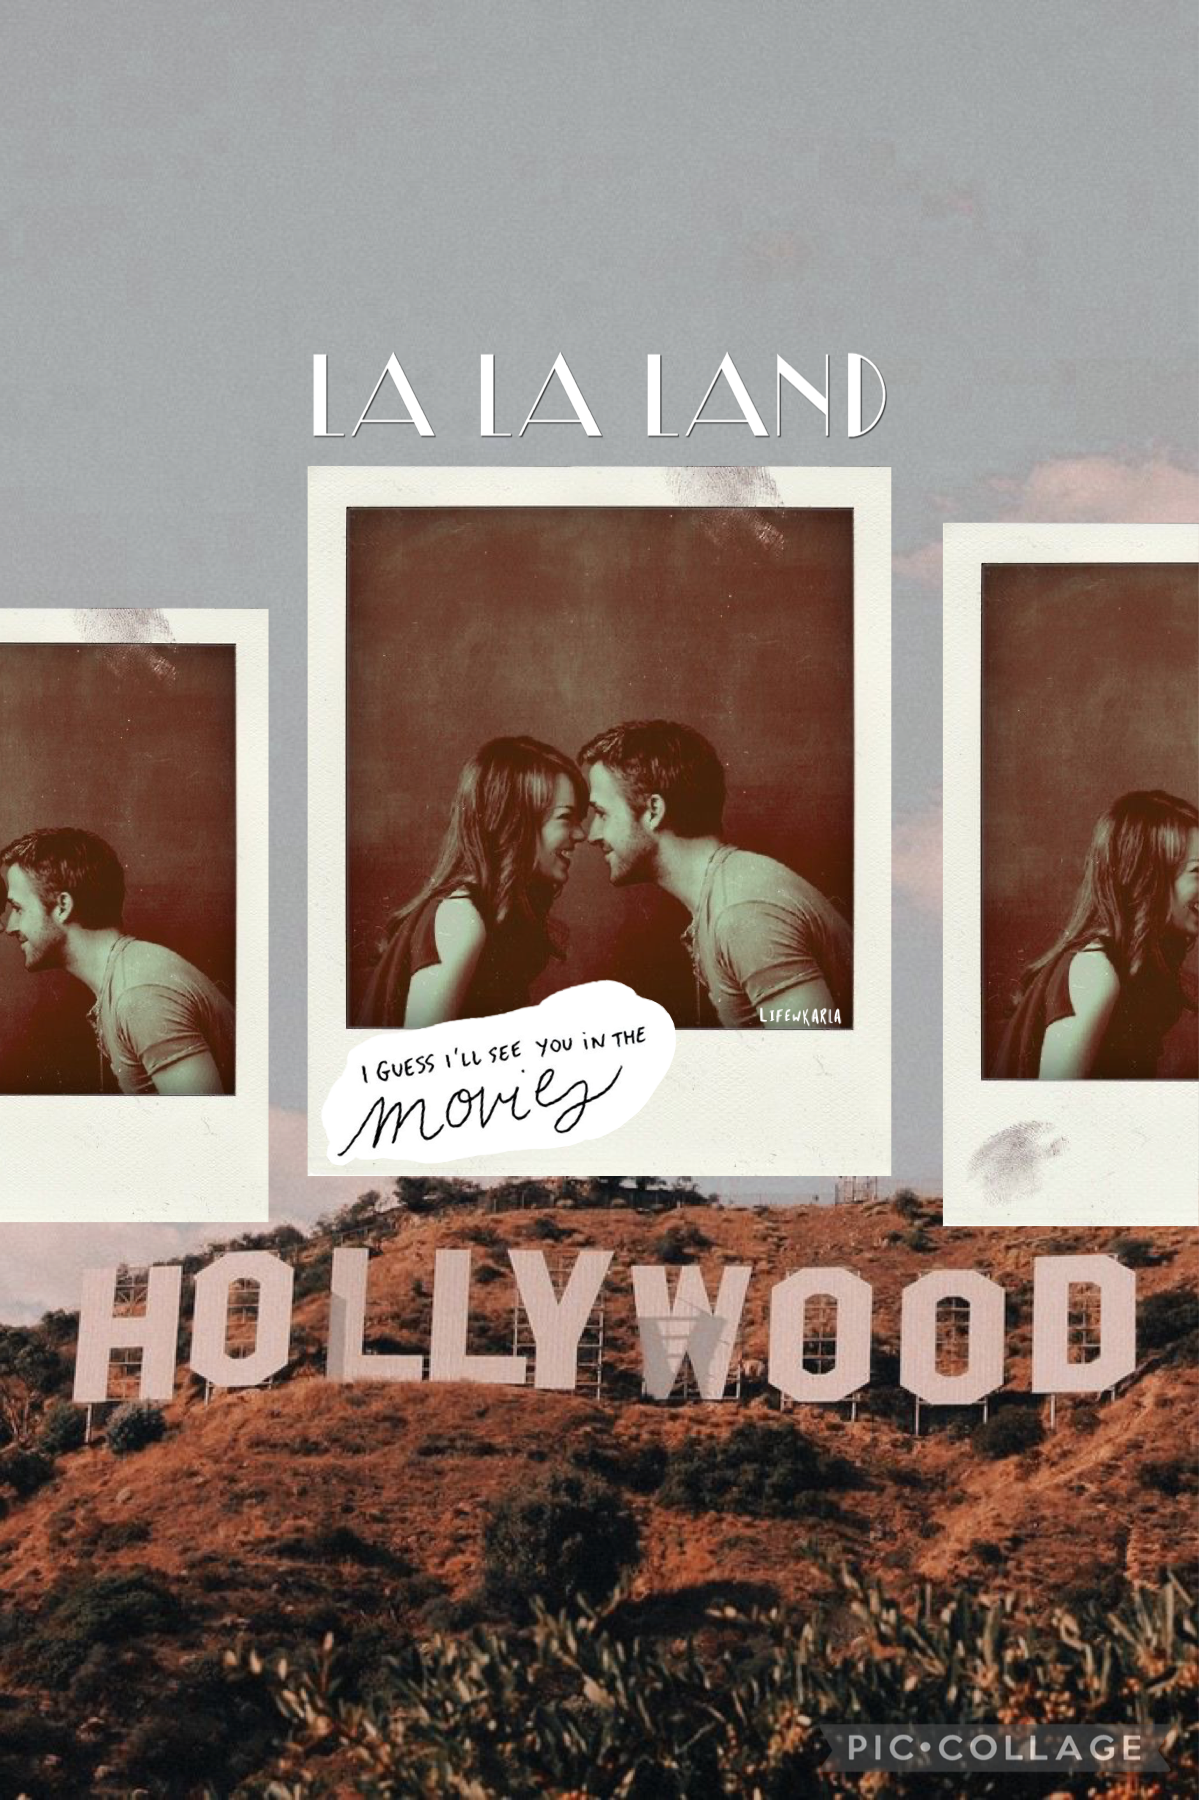 ✨ LA LA LAND ✨
City of stars ⭐️ I love this one! One of my favorites 🫶🏼  inspired by previous comments 🪩  (@talented_passively)
Qotd: who’s your favorite actor? 